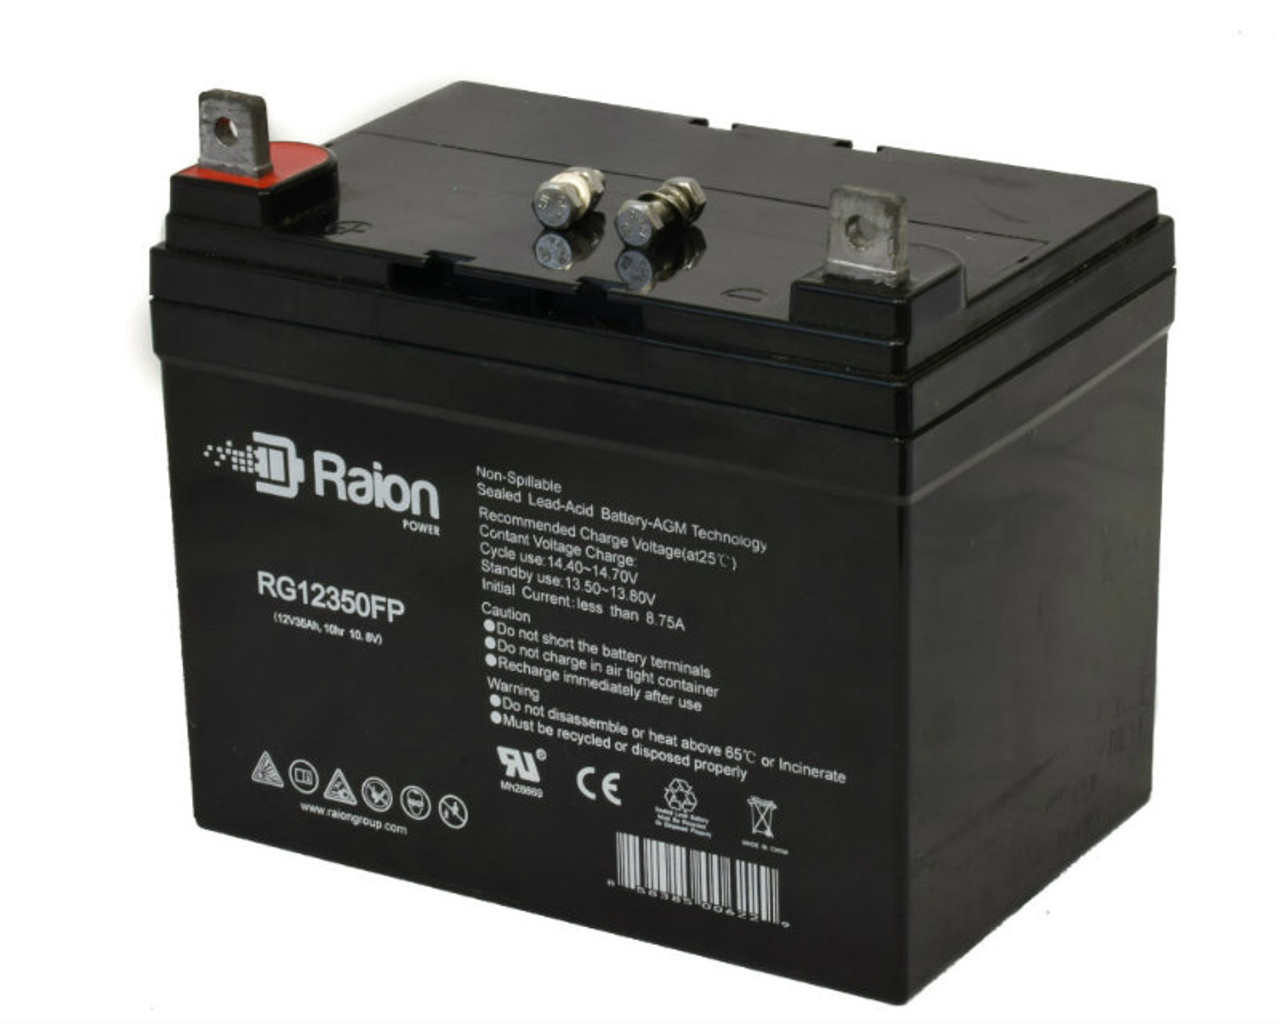 Raion Power Replacement 12V 35Ah Battery for Universal Power Group UB12350 - 1 Pack